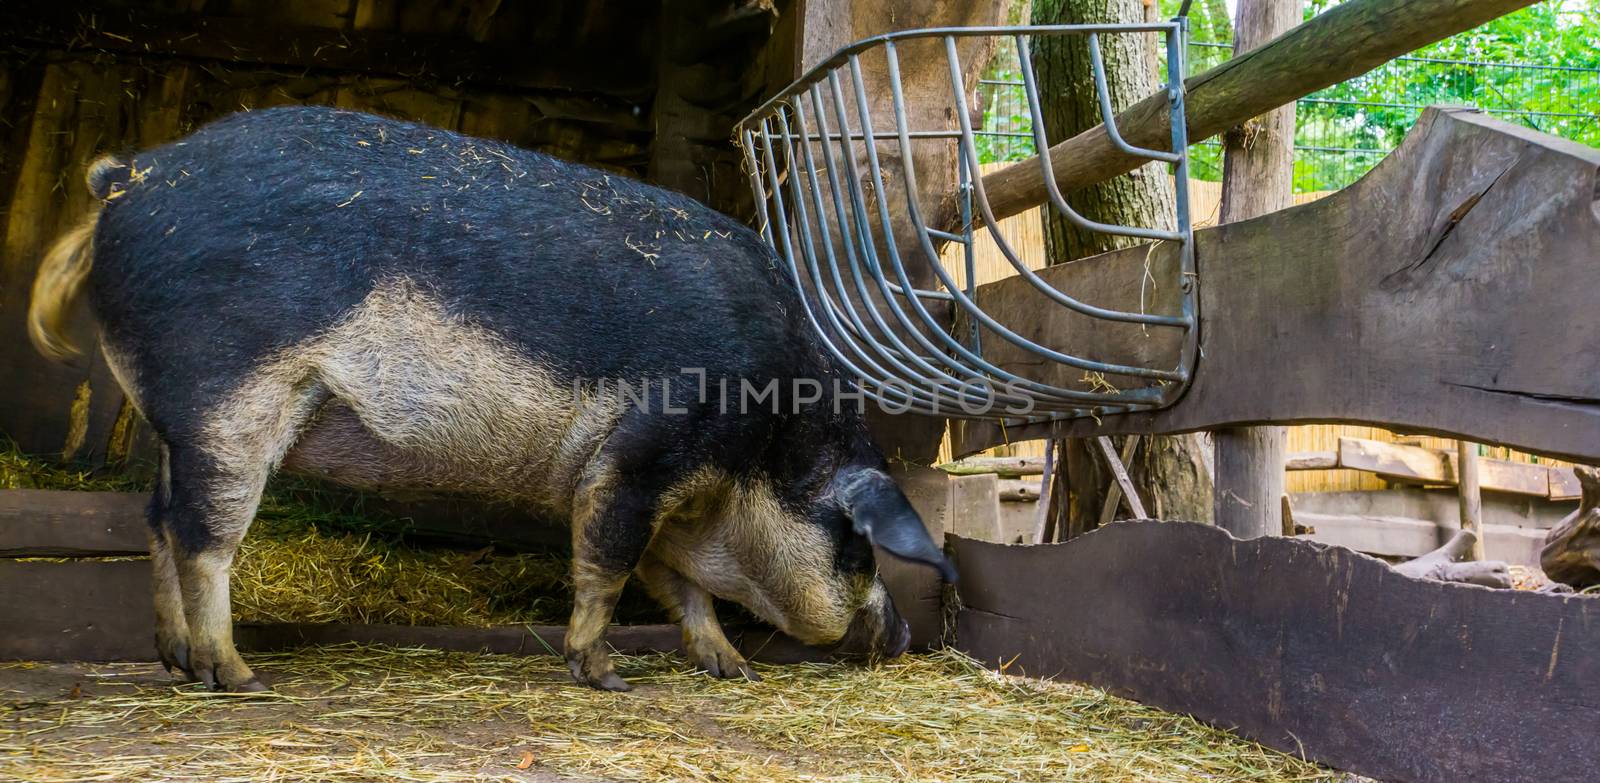 swallow bellied mangalitsa pig eating hay in the shed, domesticated cross breed from hungary by charlottebleijenberg